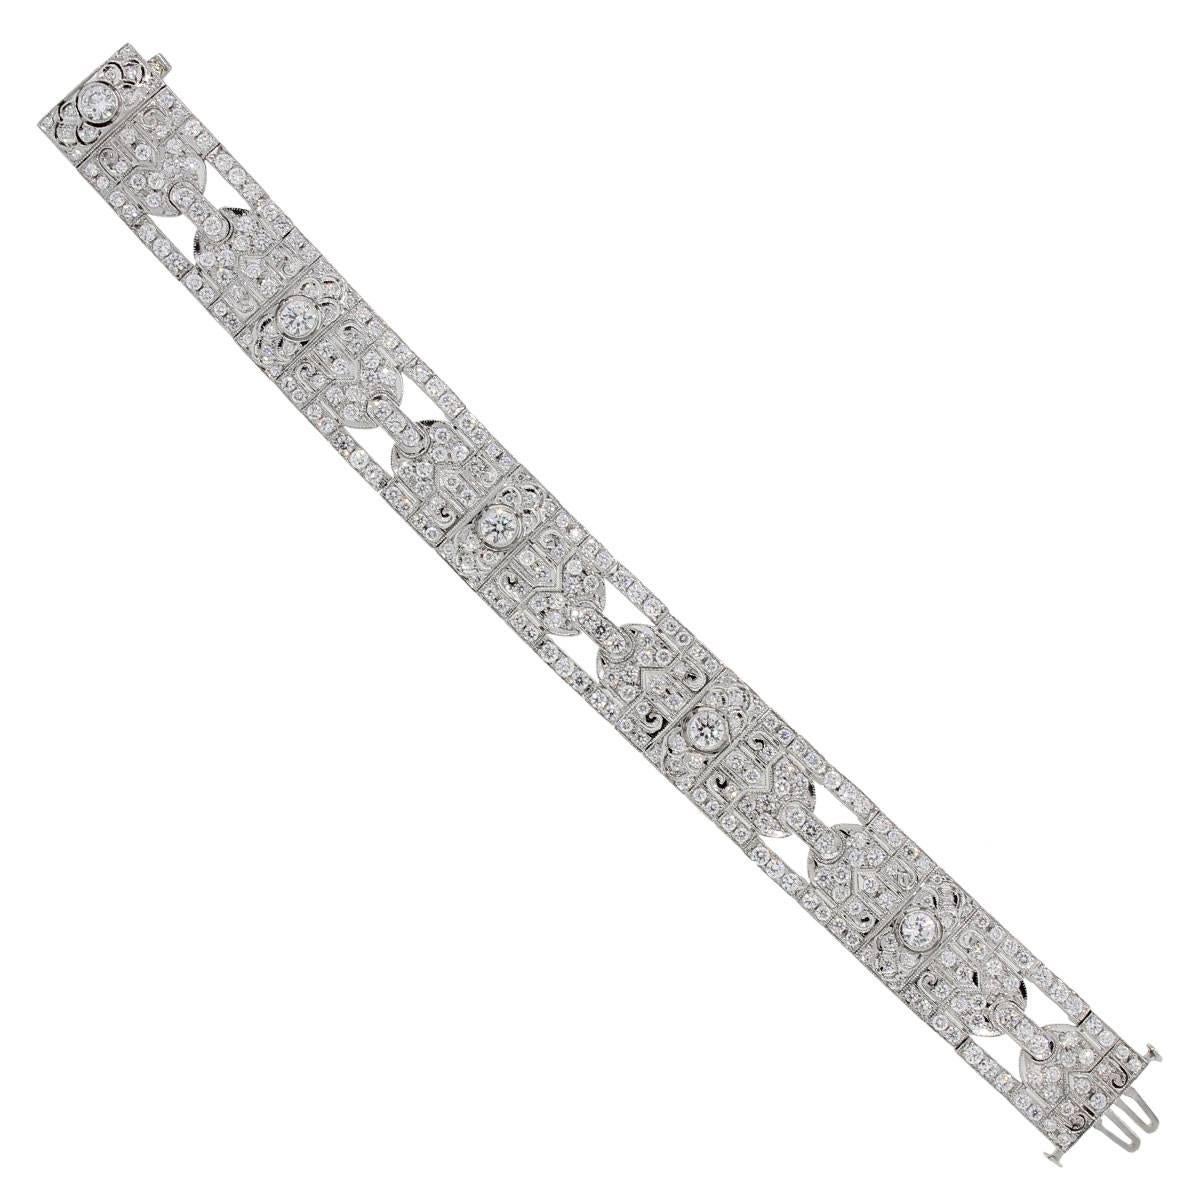 Style: Platinum 7.25ctw Diamond Deco Style Bracelet
Material: Platinum
Diamond Details: Approximately 7.25ctw of Round Brilliant Diamonds. Diamonds are G/H in color and VS in clarity.
Total Weight: 54.2g (34.9dwt)
Measurements: Fits a 7